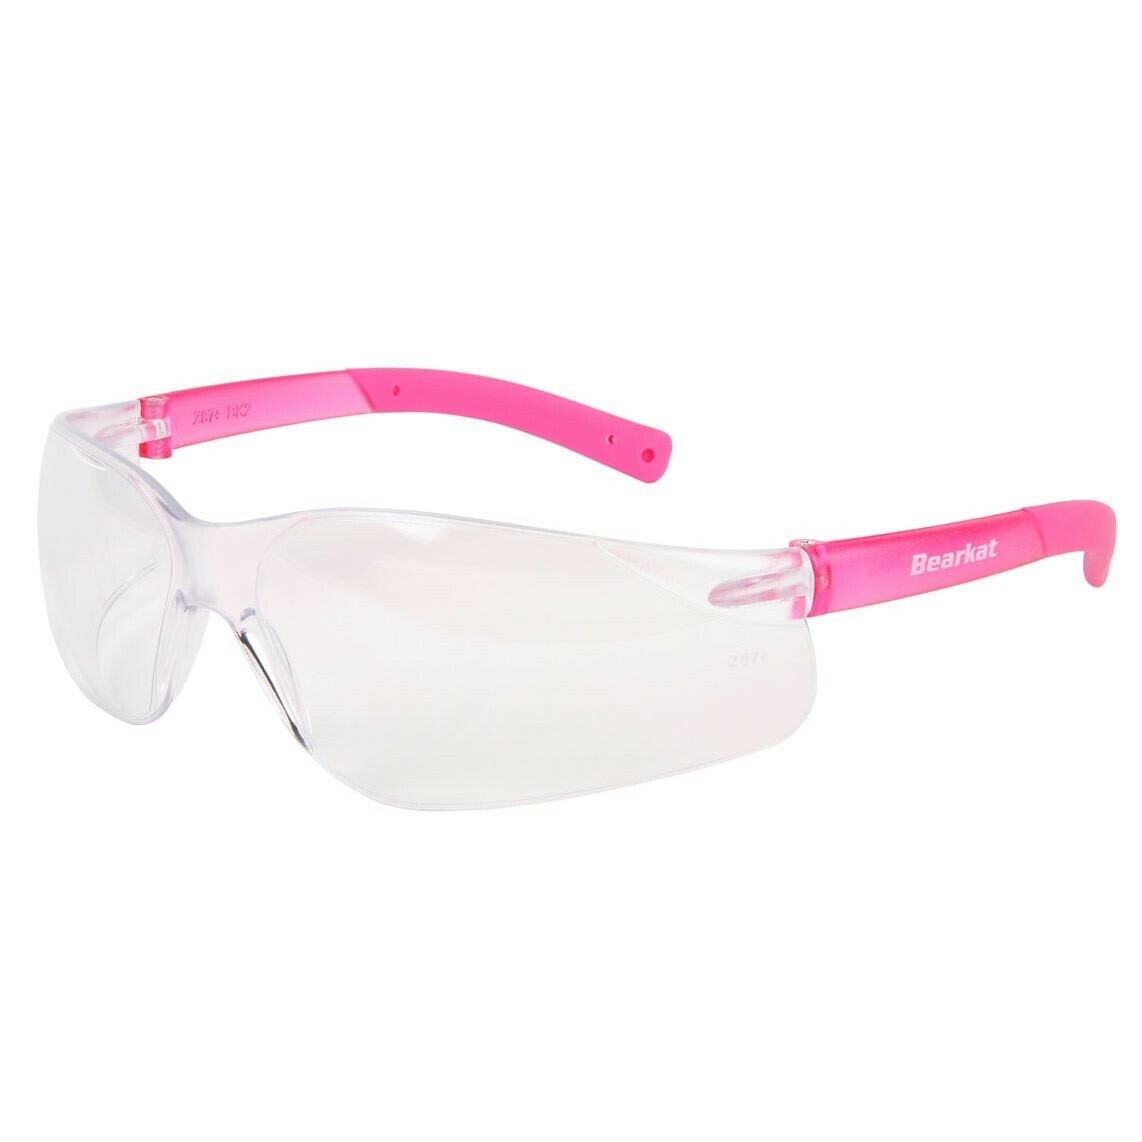 Crews BearKat Small Frame Pink Temple Safety Glasses